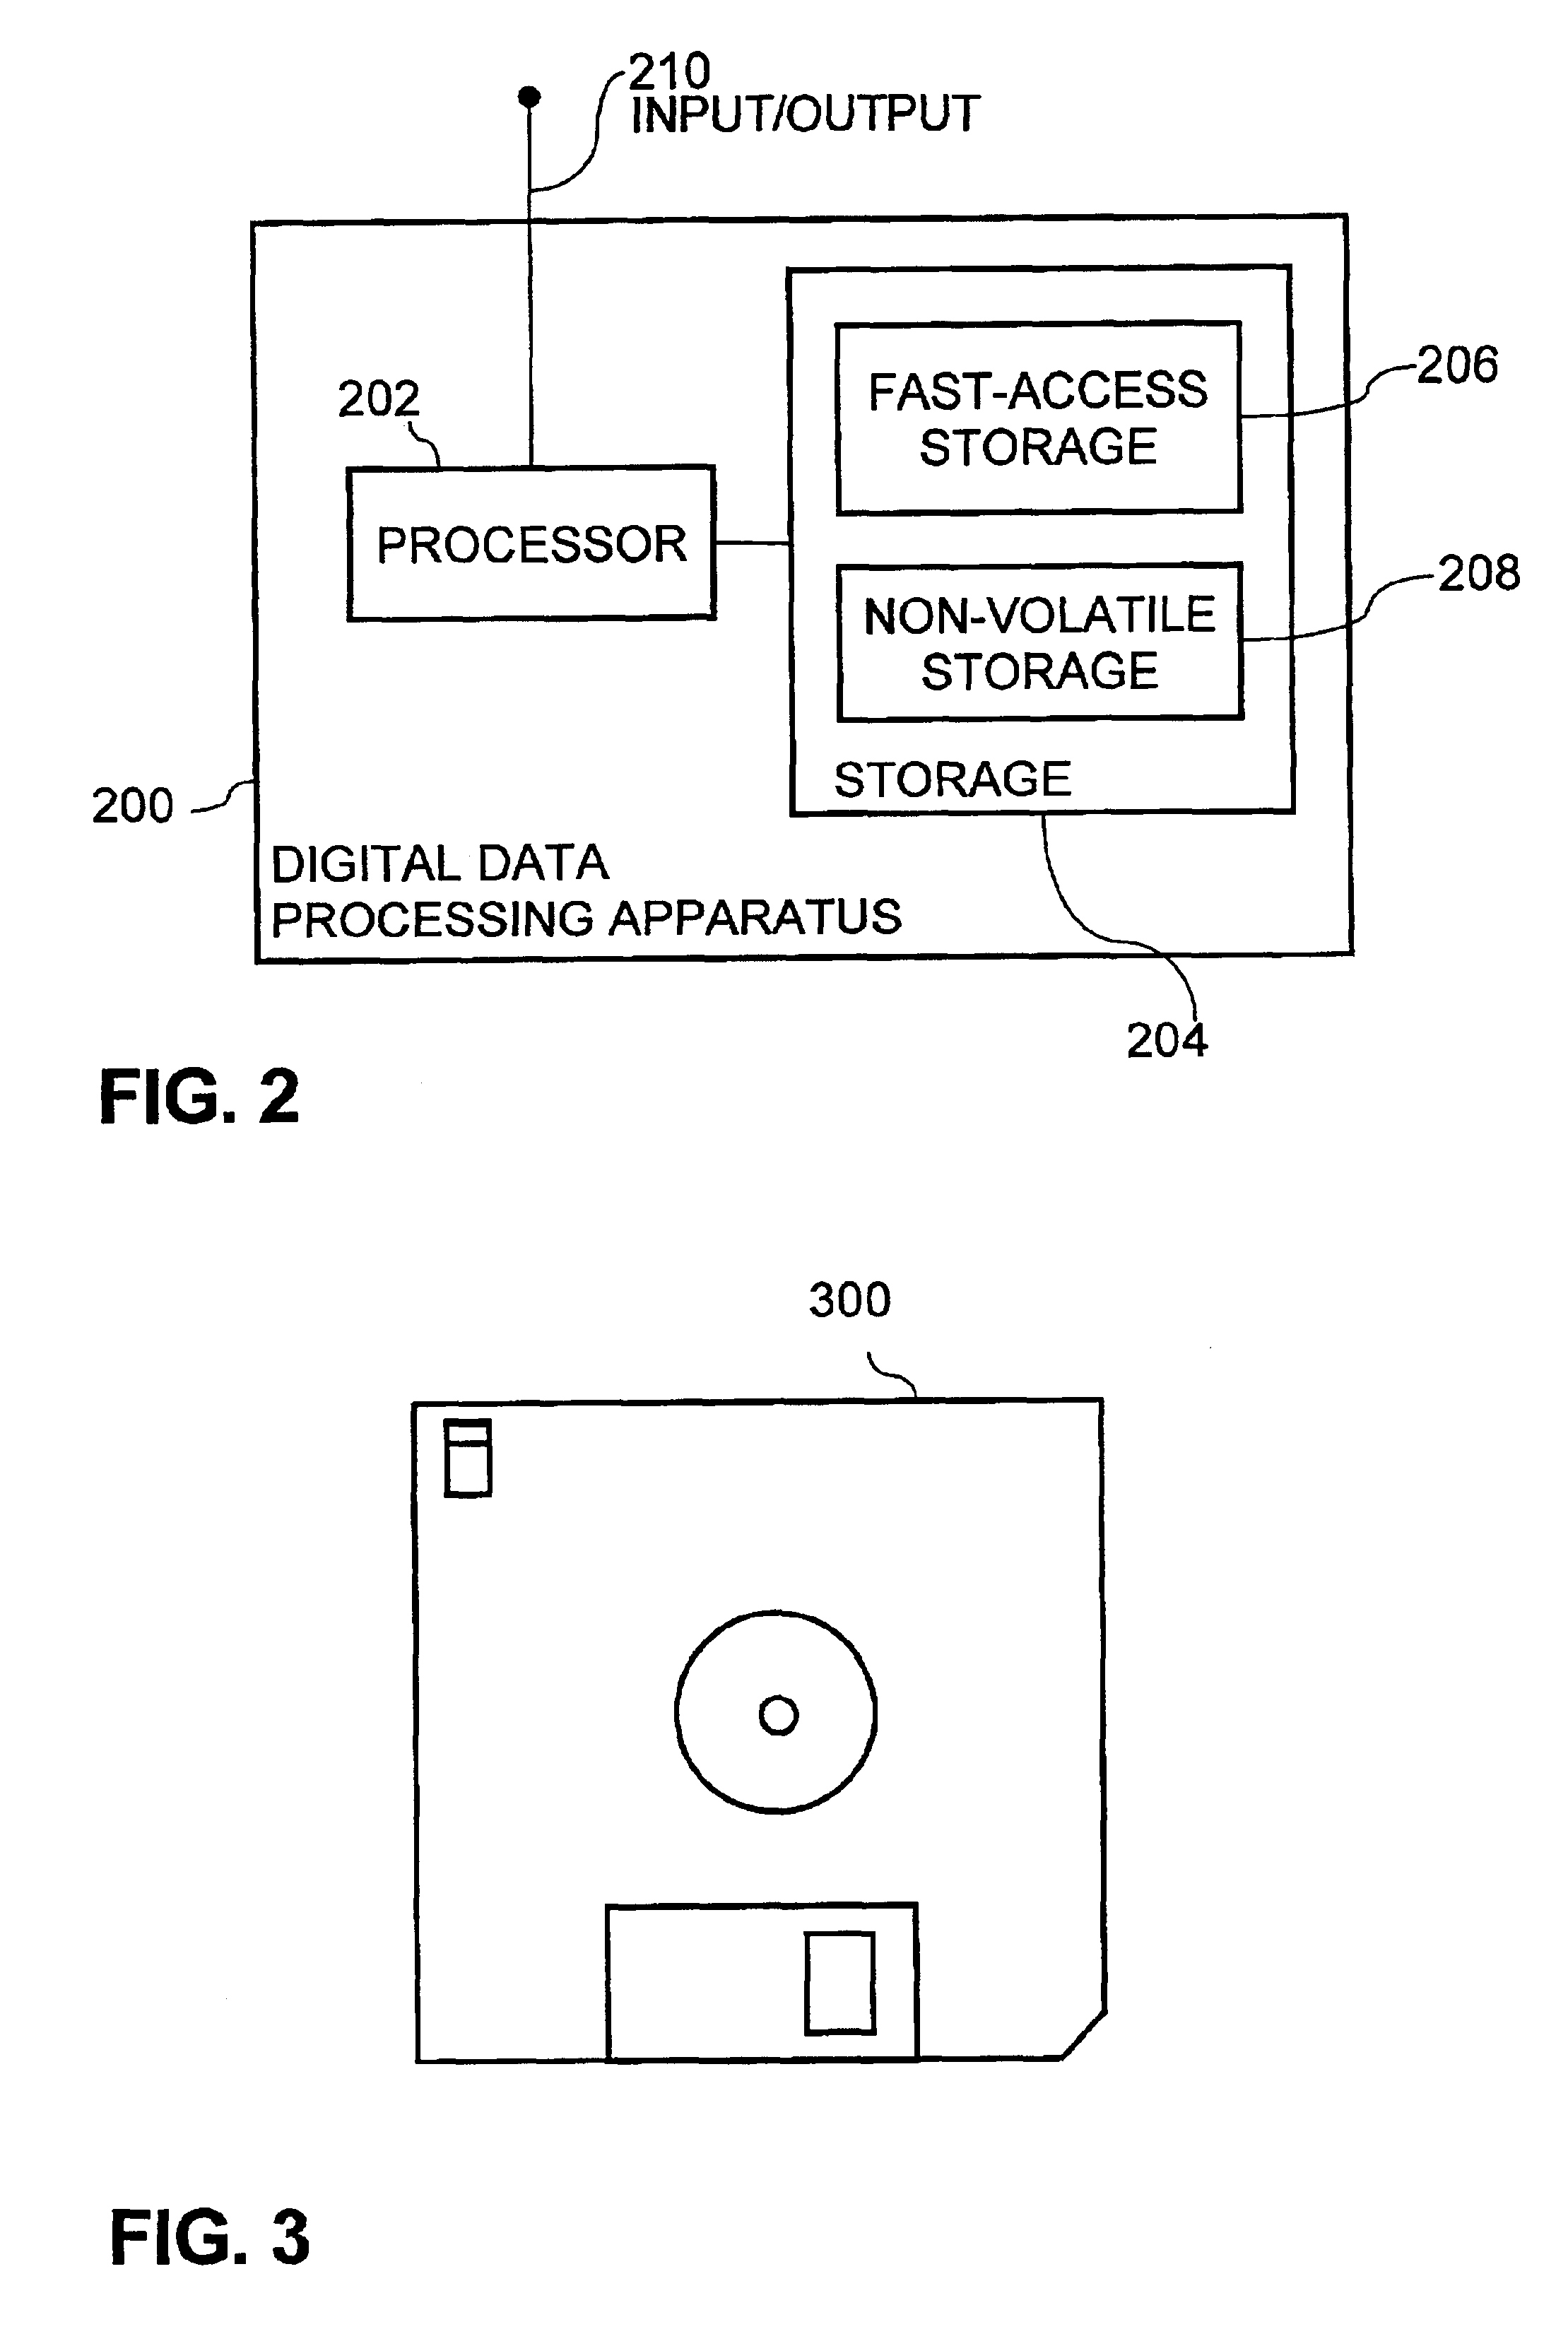 Method for maintaining consistent dual copies of vital product data in a dual accessor library of portable data storage media